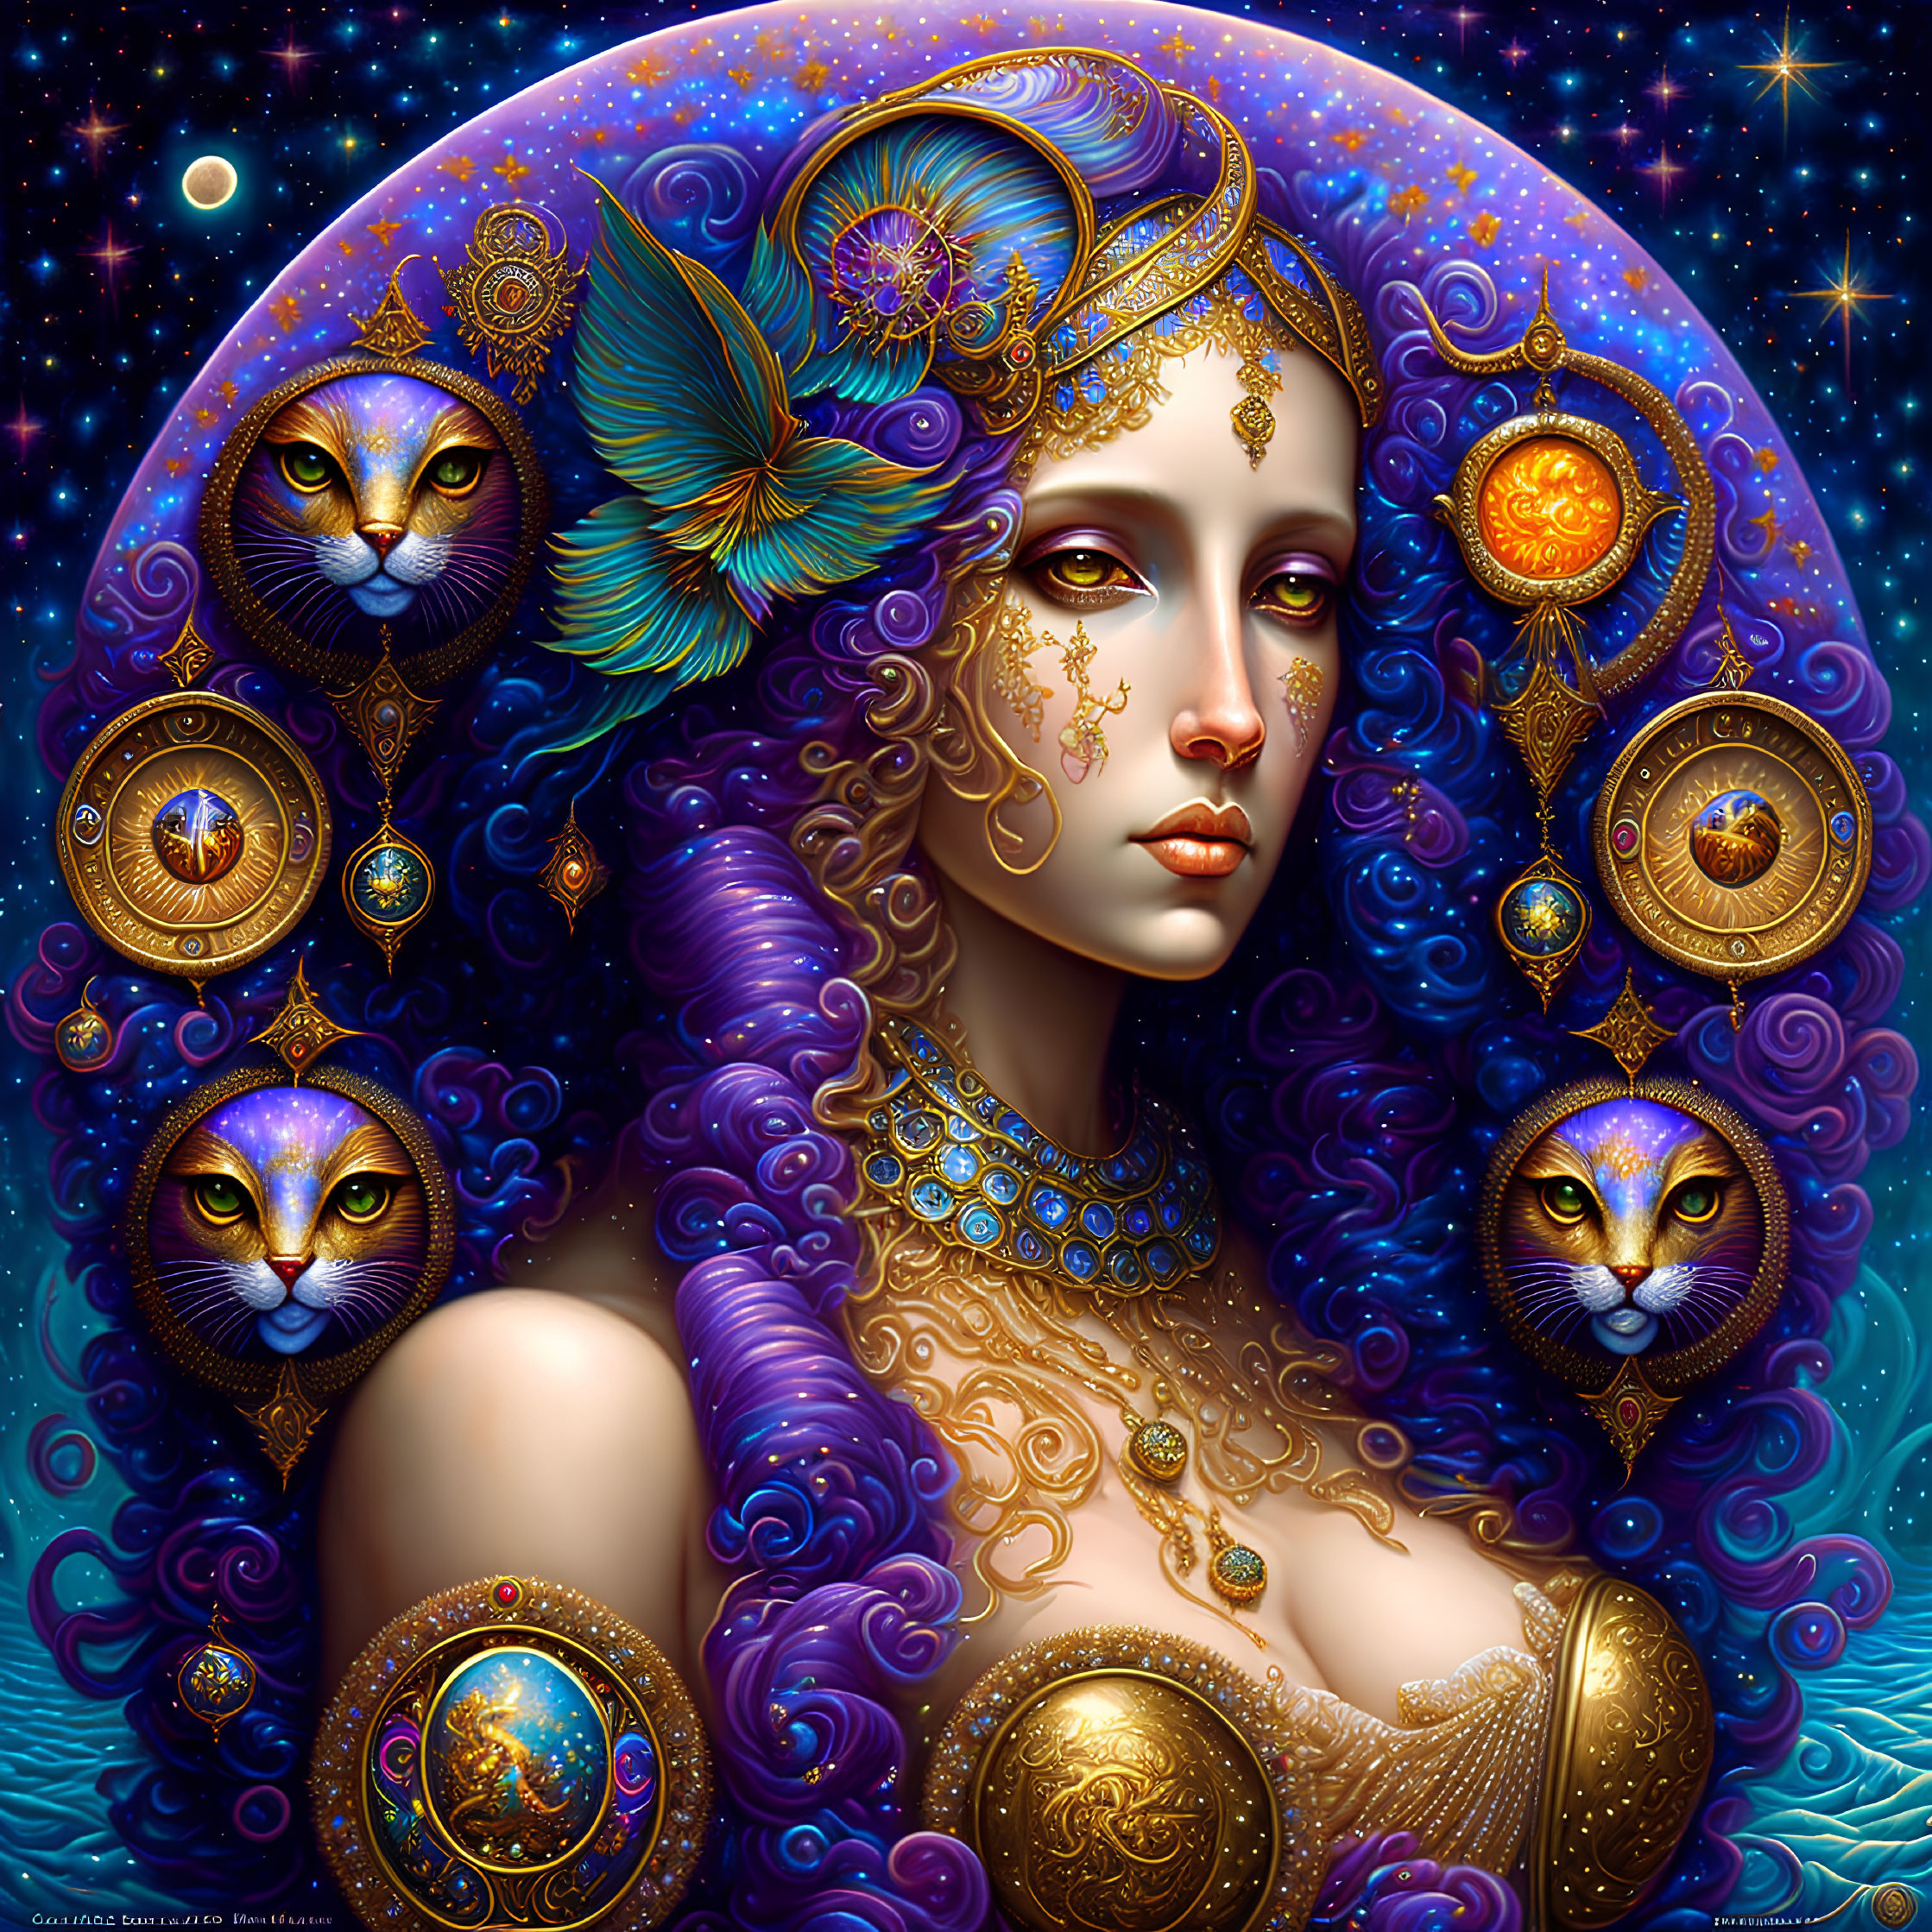 Surreal portrait of woman with purple hair and golden adornments, surrounded by cosmic cats and celestial